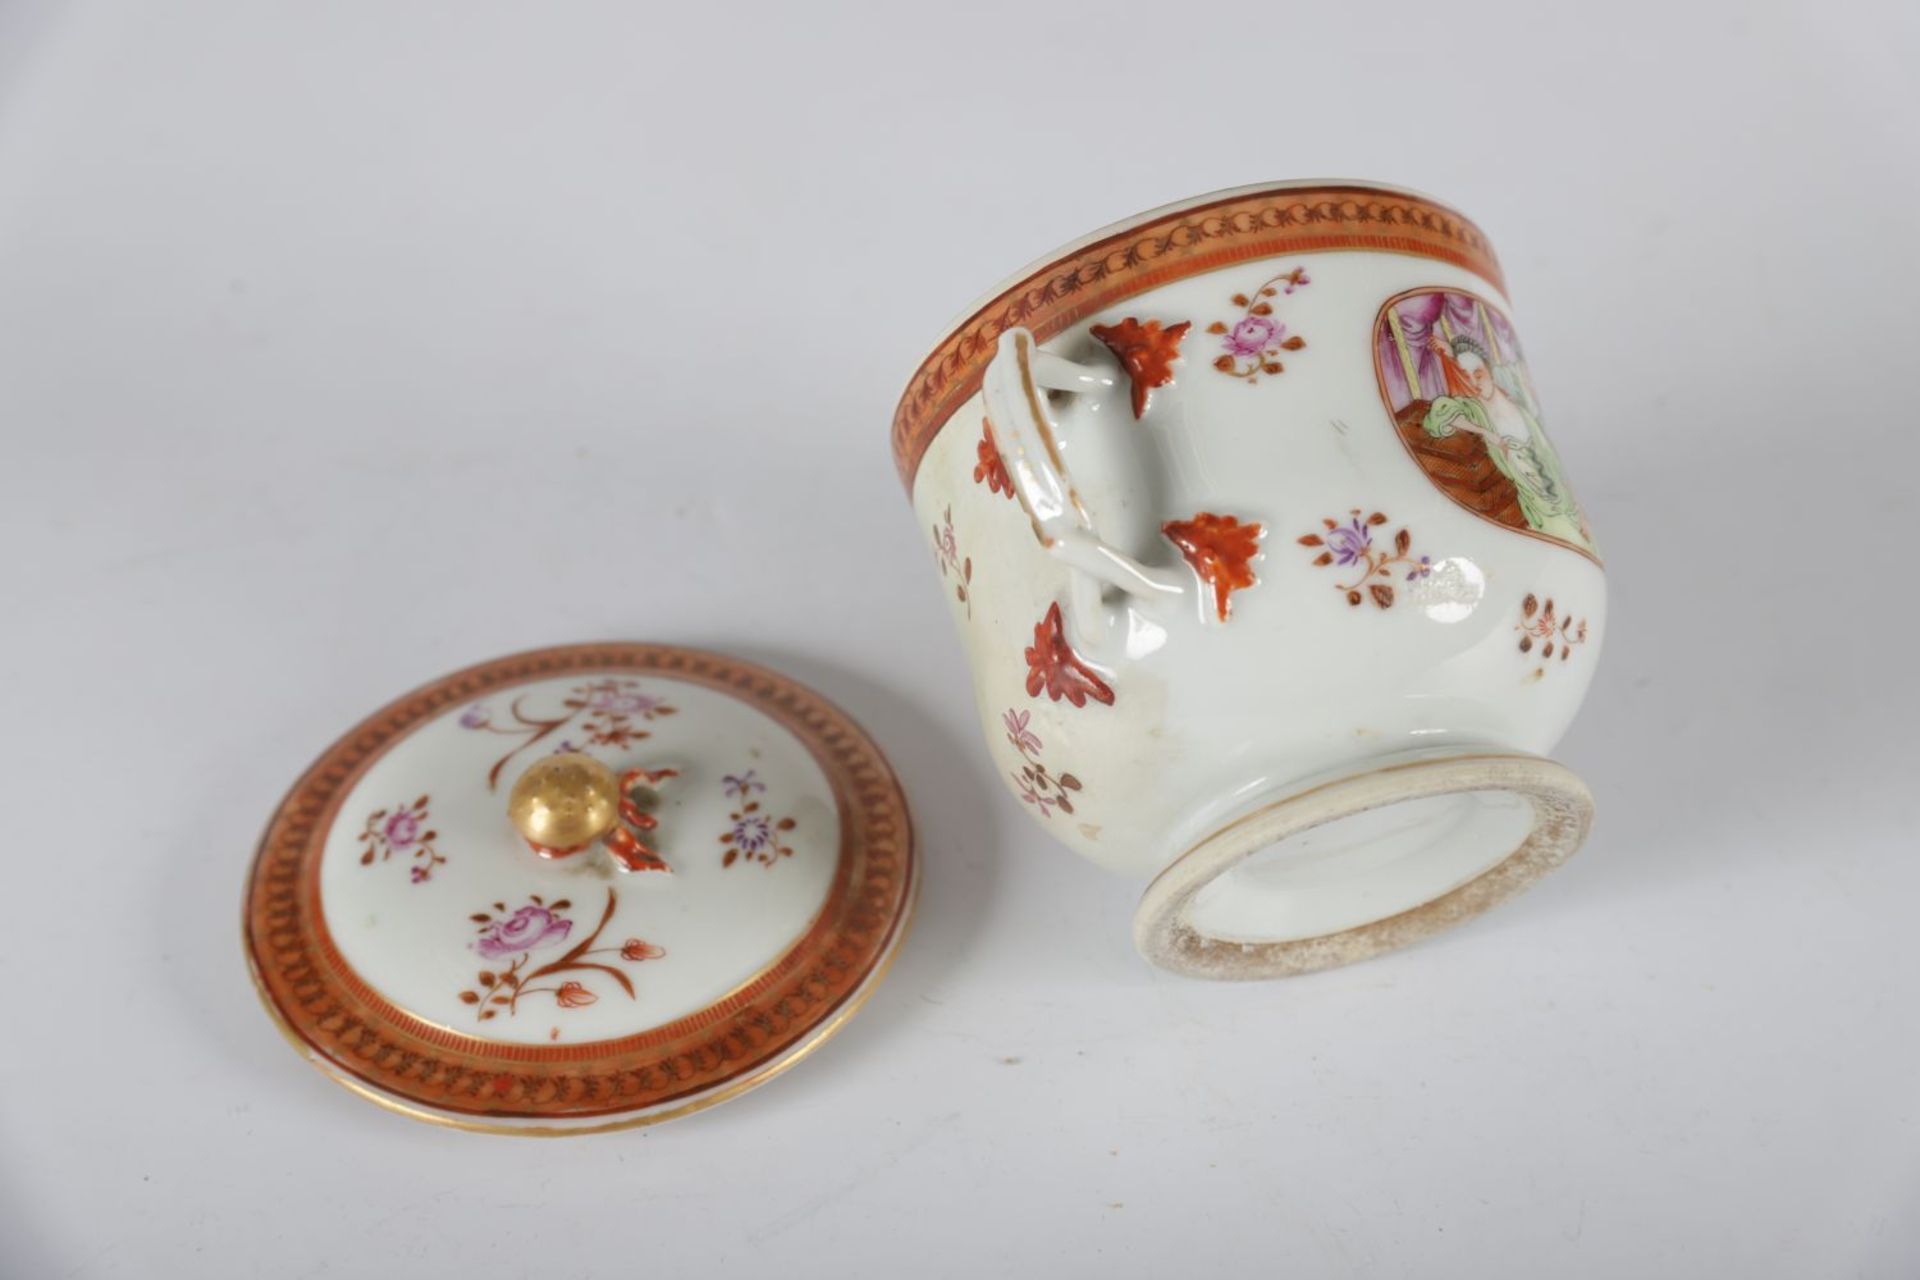 18TH-CENTURY CHINESE EXPORT CUP - Image 3 of 3